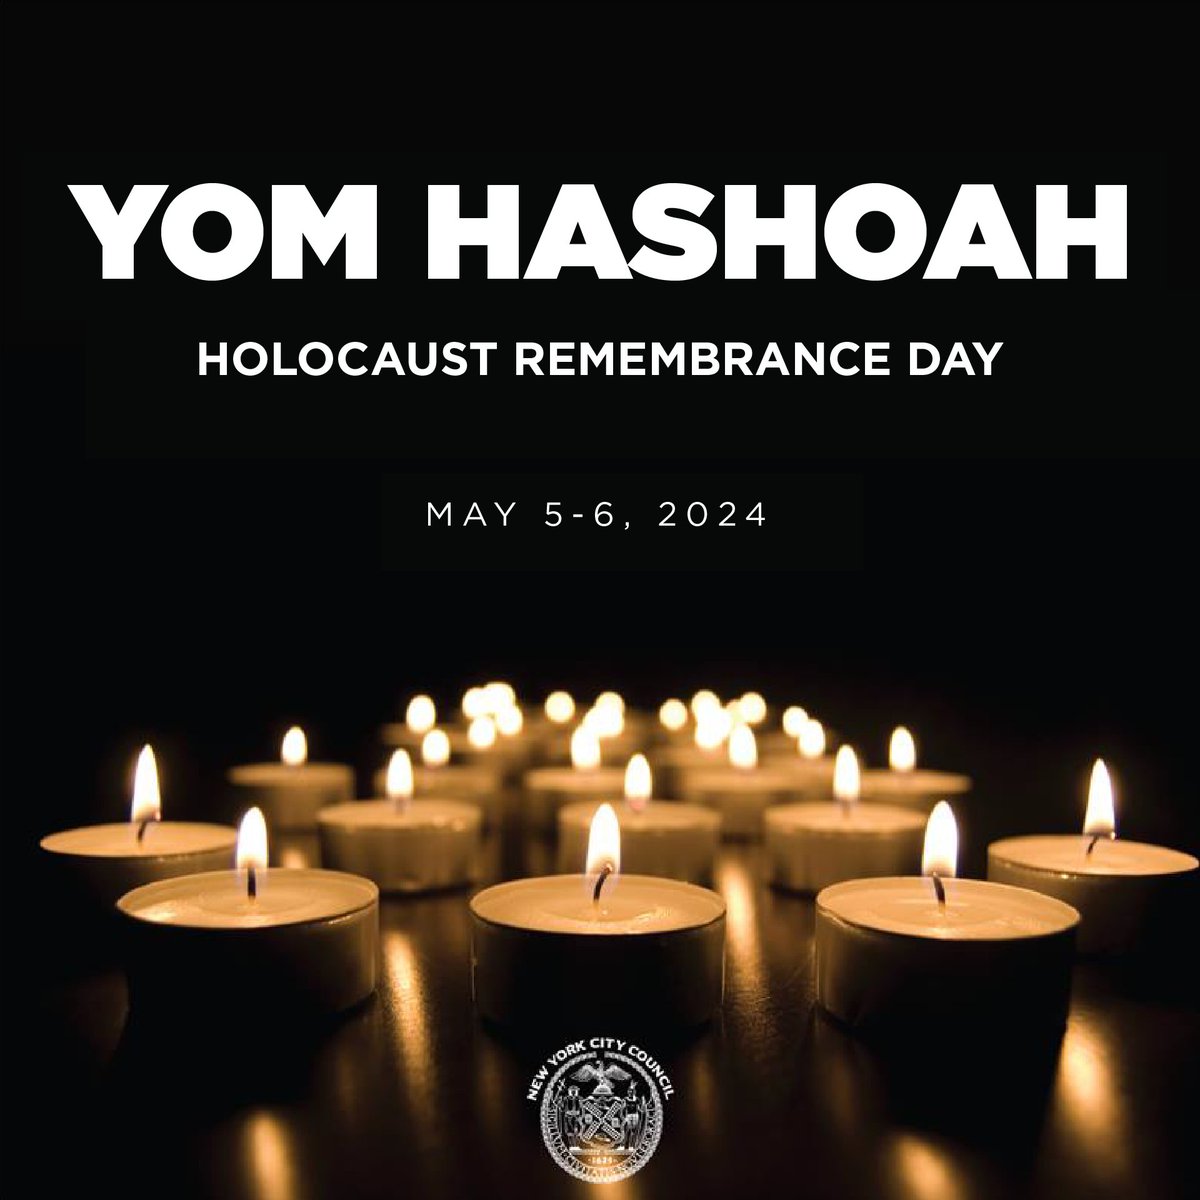 Yom HaShoah serves as a somber reminder of the millions of Jewish people who were killed in the Holocaust. Our solidarity with the Jewish community and against antisemitism remains steadfast today and every day.